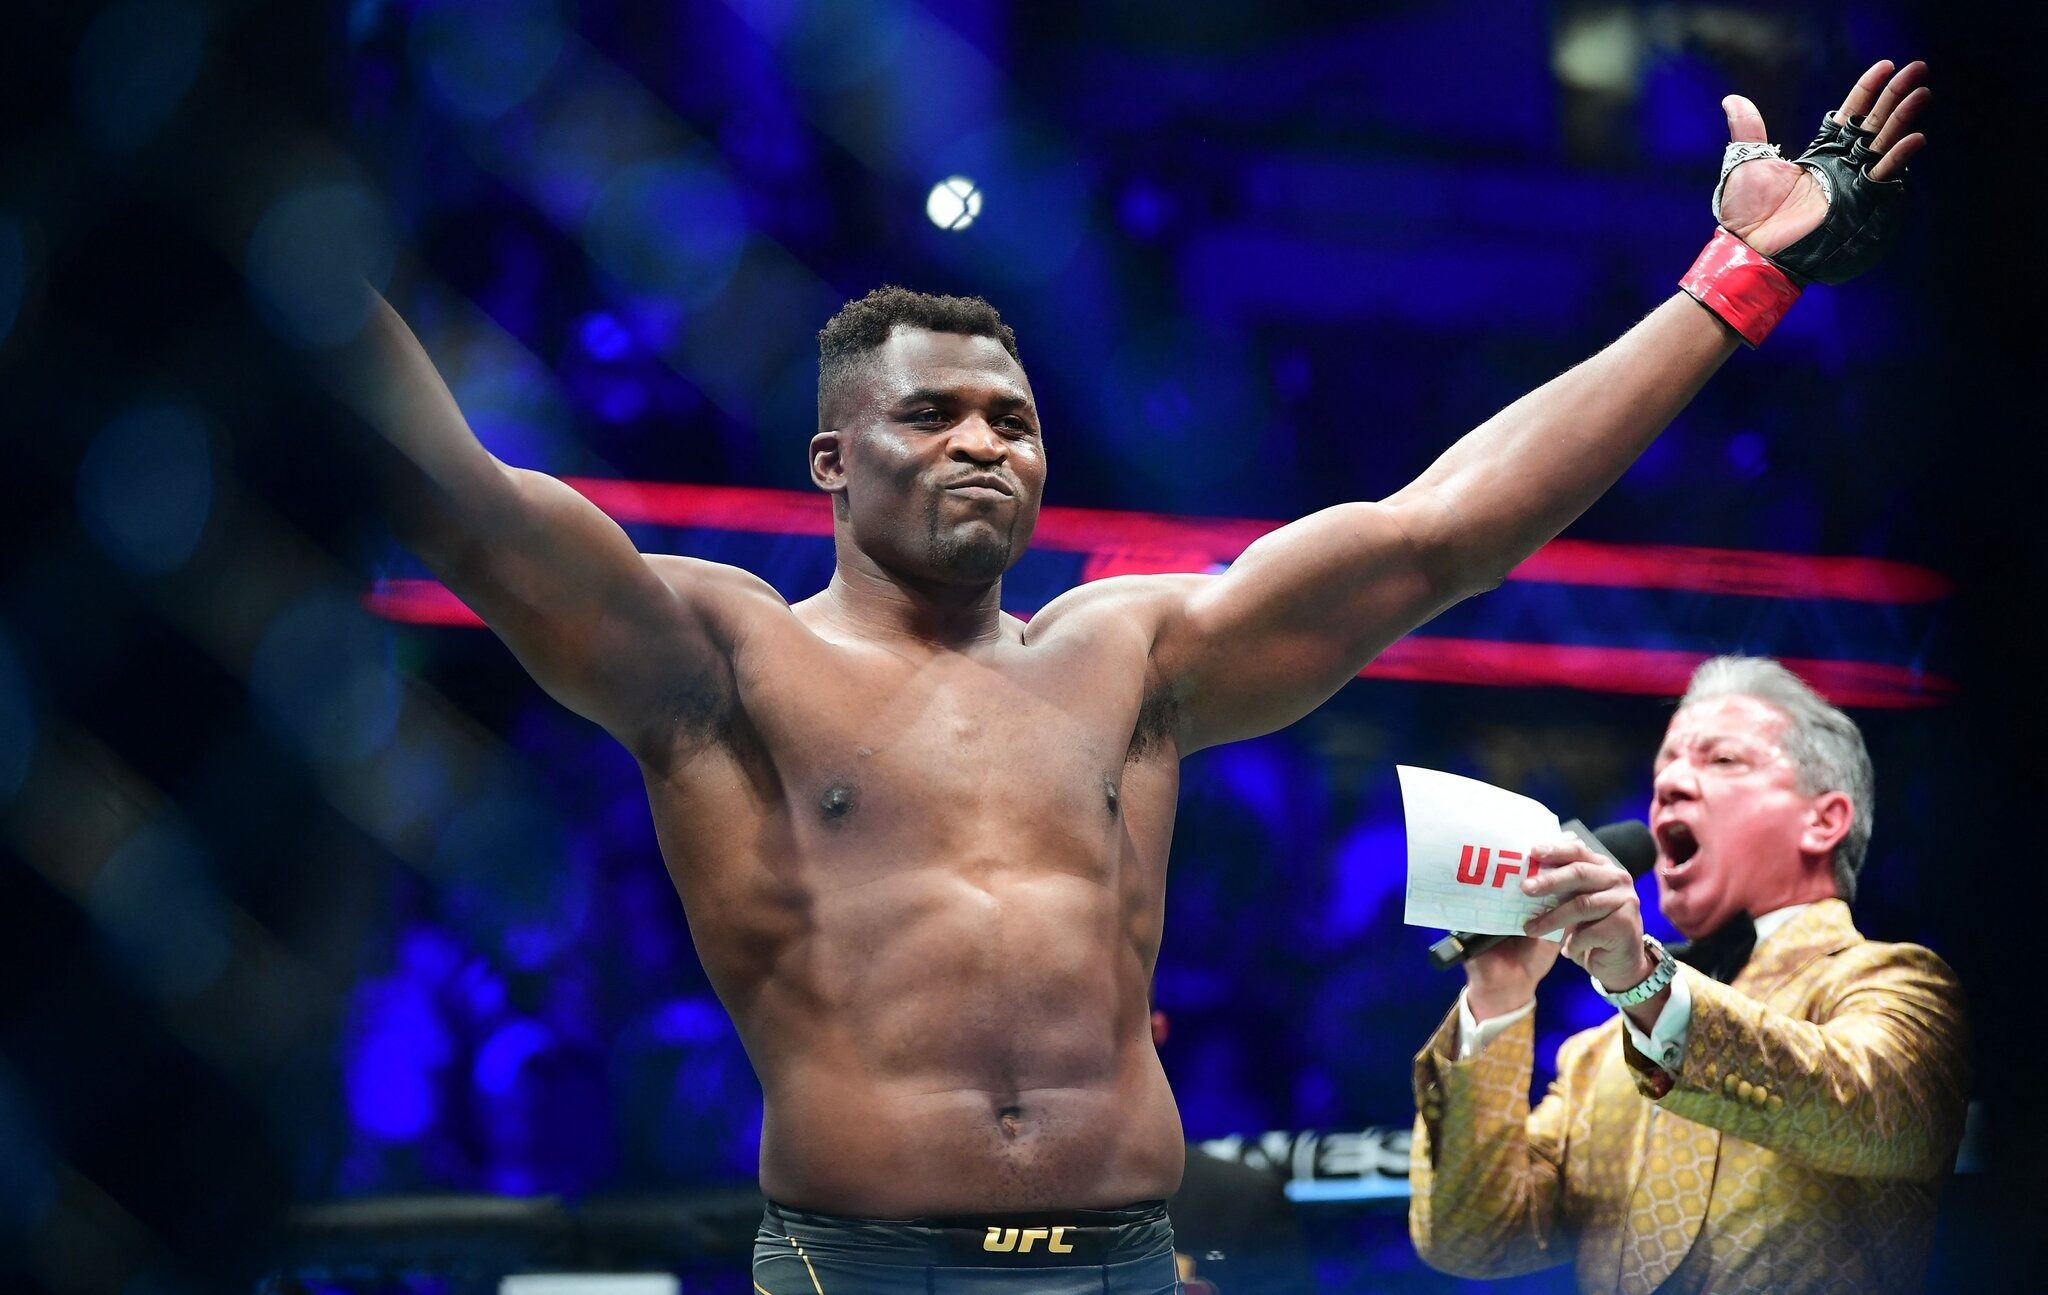 Ngannou's Coach: Ferreira Definitely Intrigues Francis More Than Bader